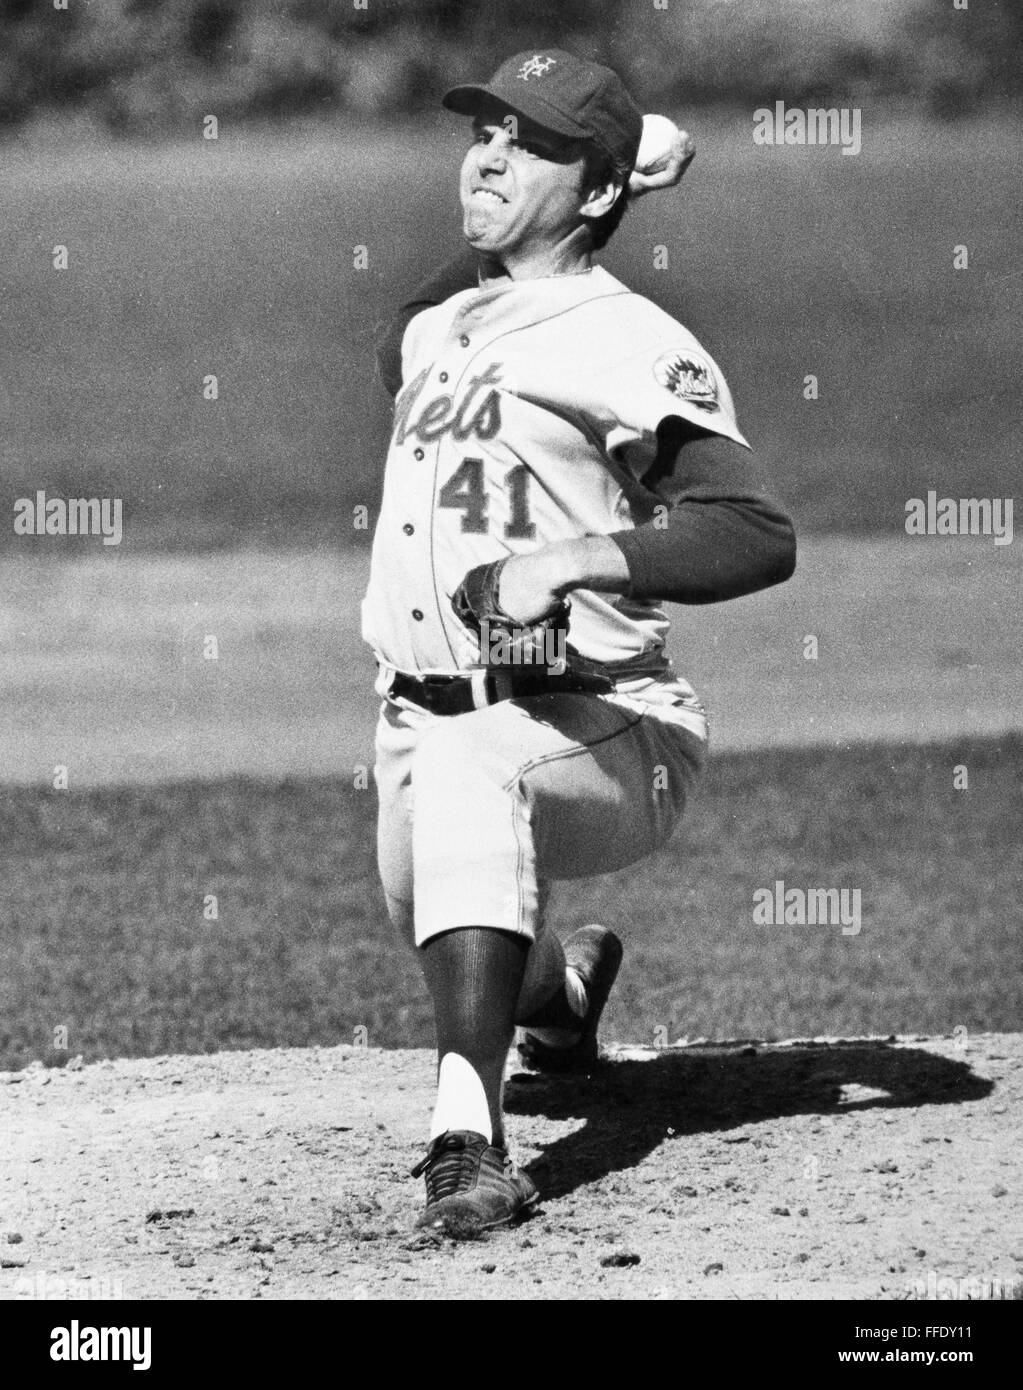 TOM SEAVER (1944-). /nGeorge Thomas Seaver, known as Tom. American baseball pitcher. Photographed while pitching for the New York Mets, 1975. Stock Photo